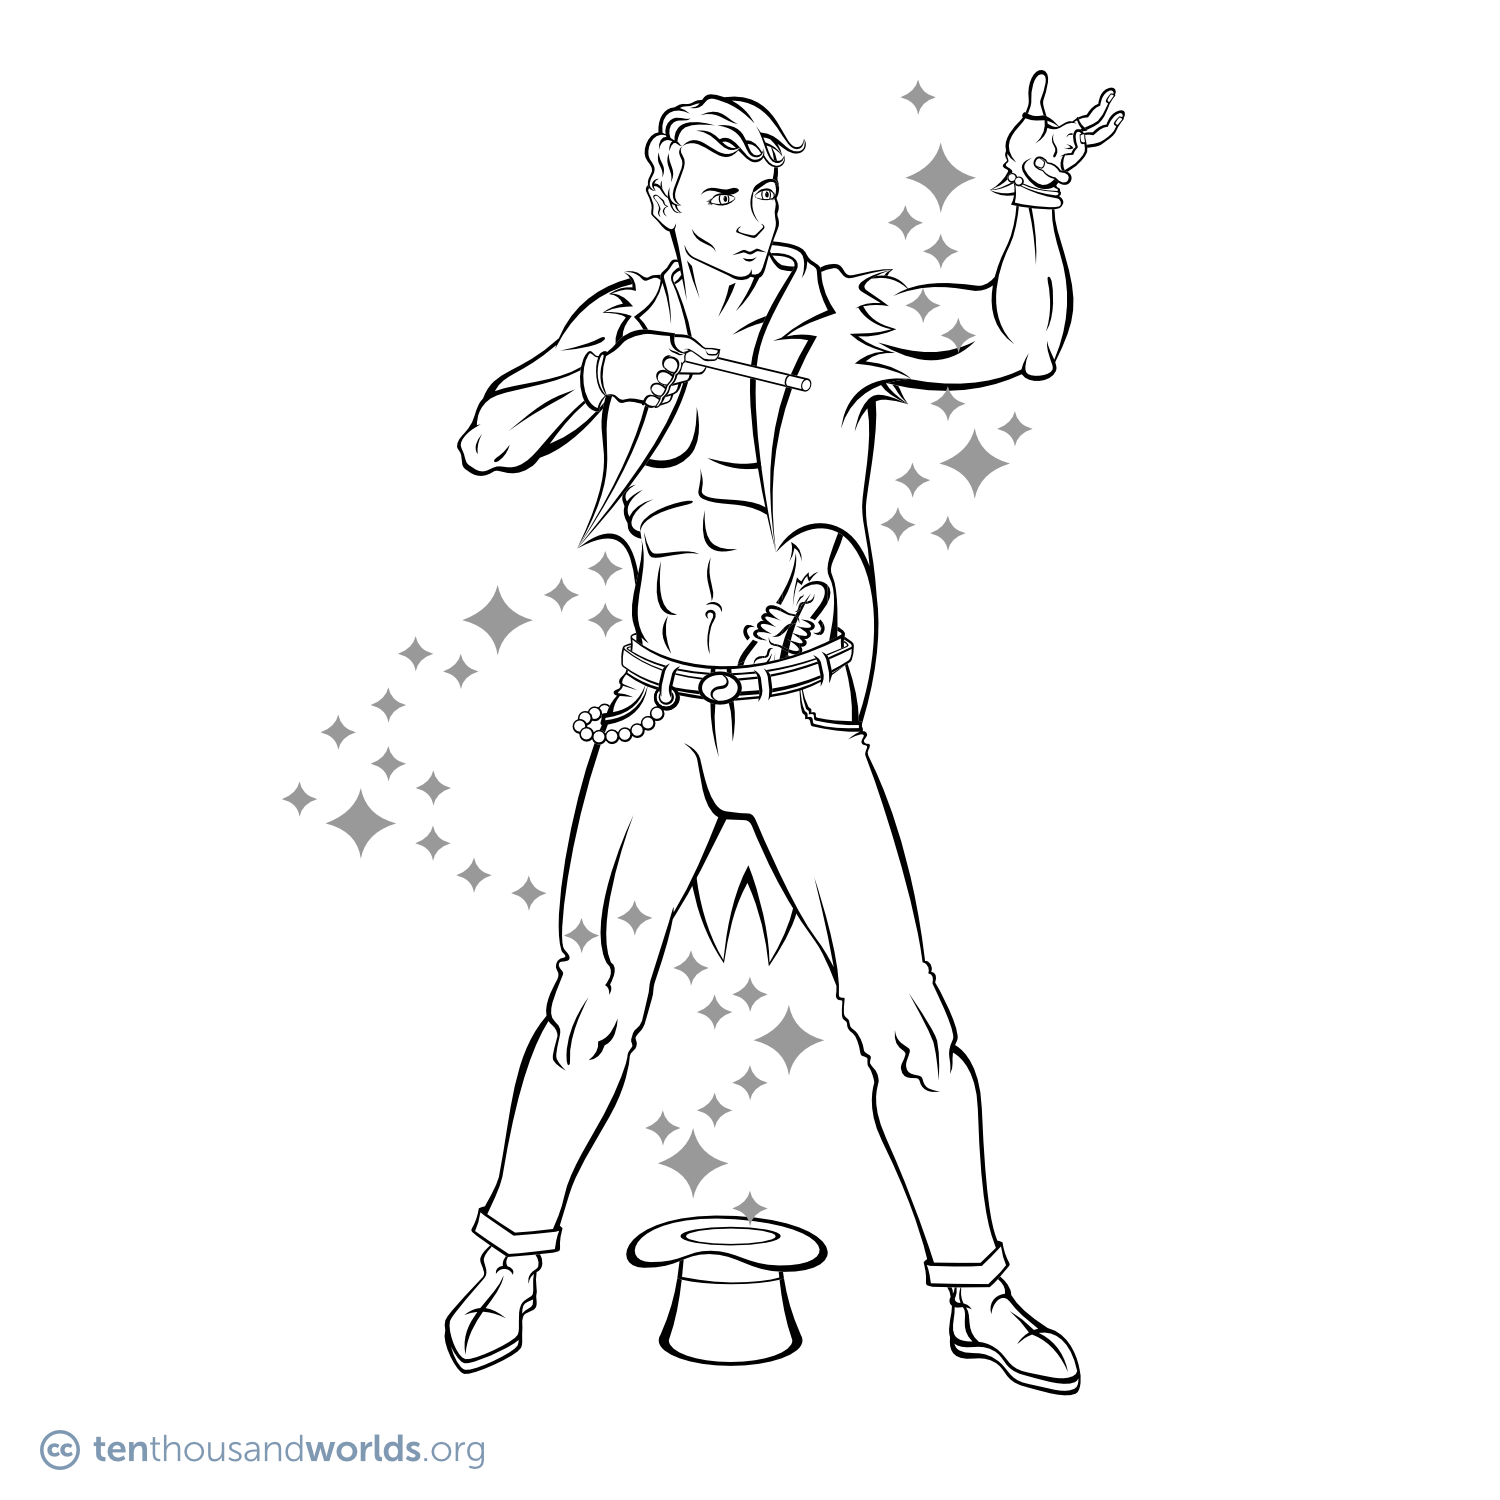 An ink outline of a stage magician wearing a tuxedo coat with torn-off sleeves, jeans, boots, and fingerless gloves waves a wand while standing straddled over an upturned top hat, from which a trail of sparks spirals up around him.